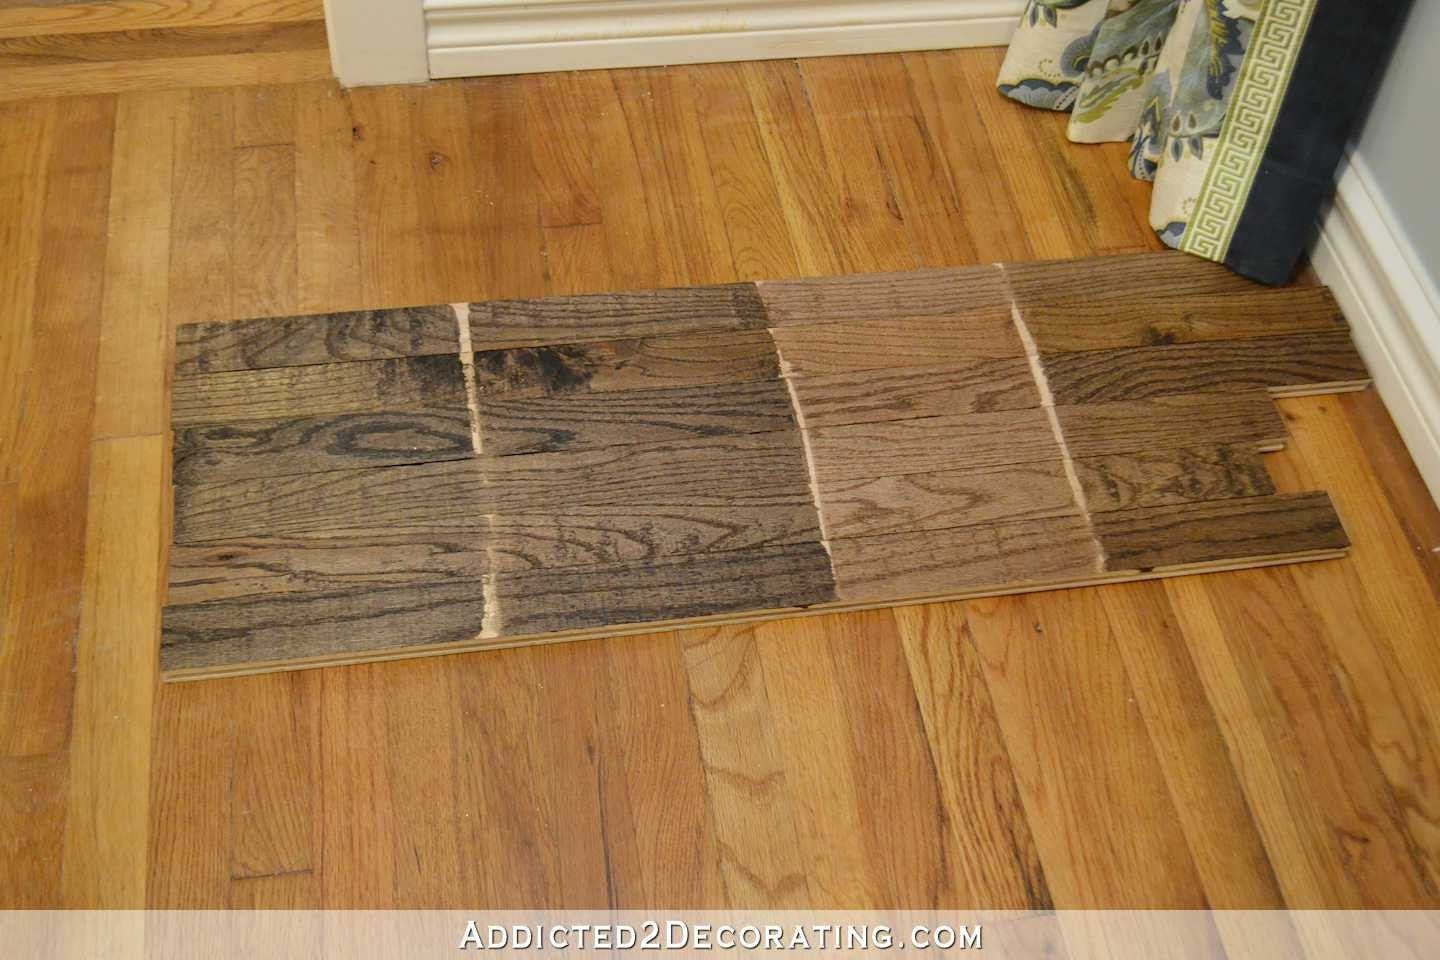 10 Recommended Hardwood Floor Stain Options 2024 free download hardwood floor stain options of 15 unique hardwood floor stain colors photos dizpos com in hardwood floor stain colors inspirational shocking testing stain colors for my red oak hardwood flo